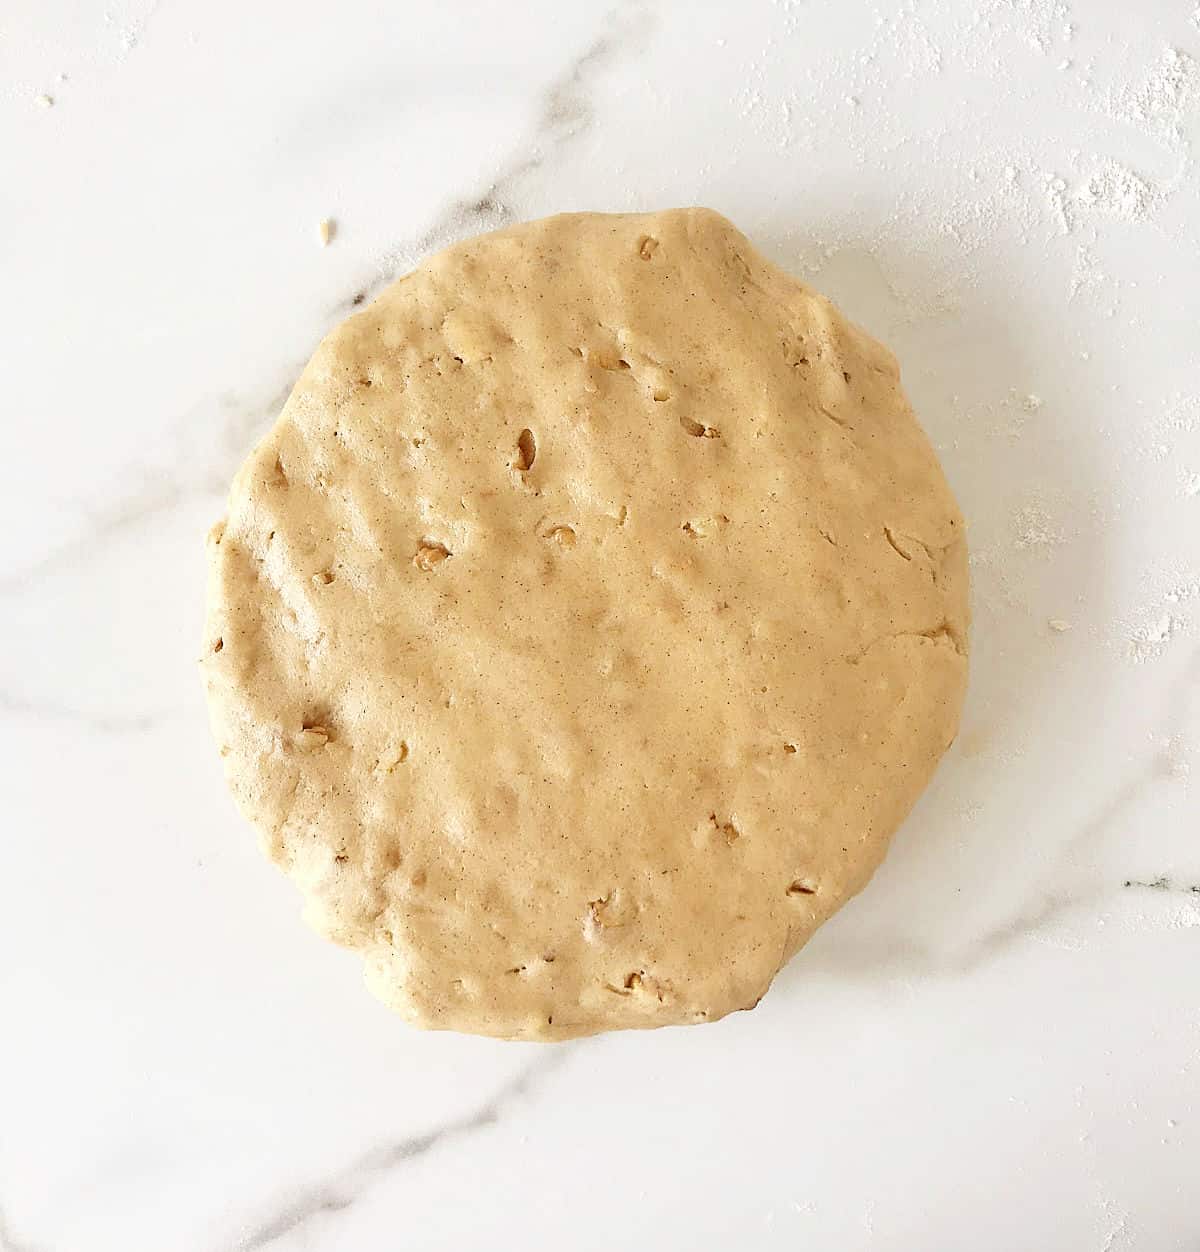 Round of cinnamon dough on a white marble surface